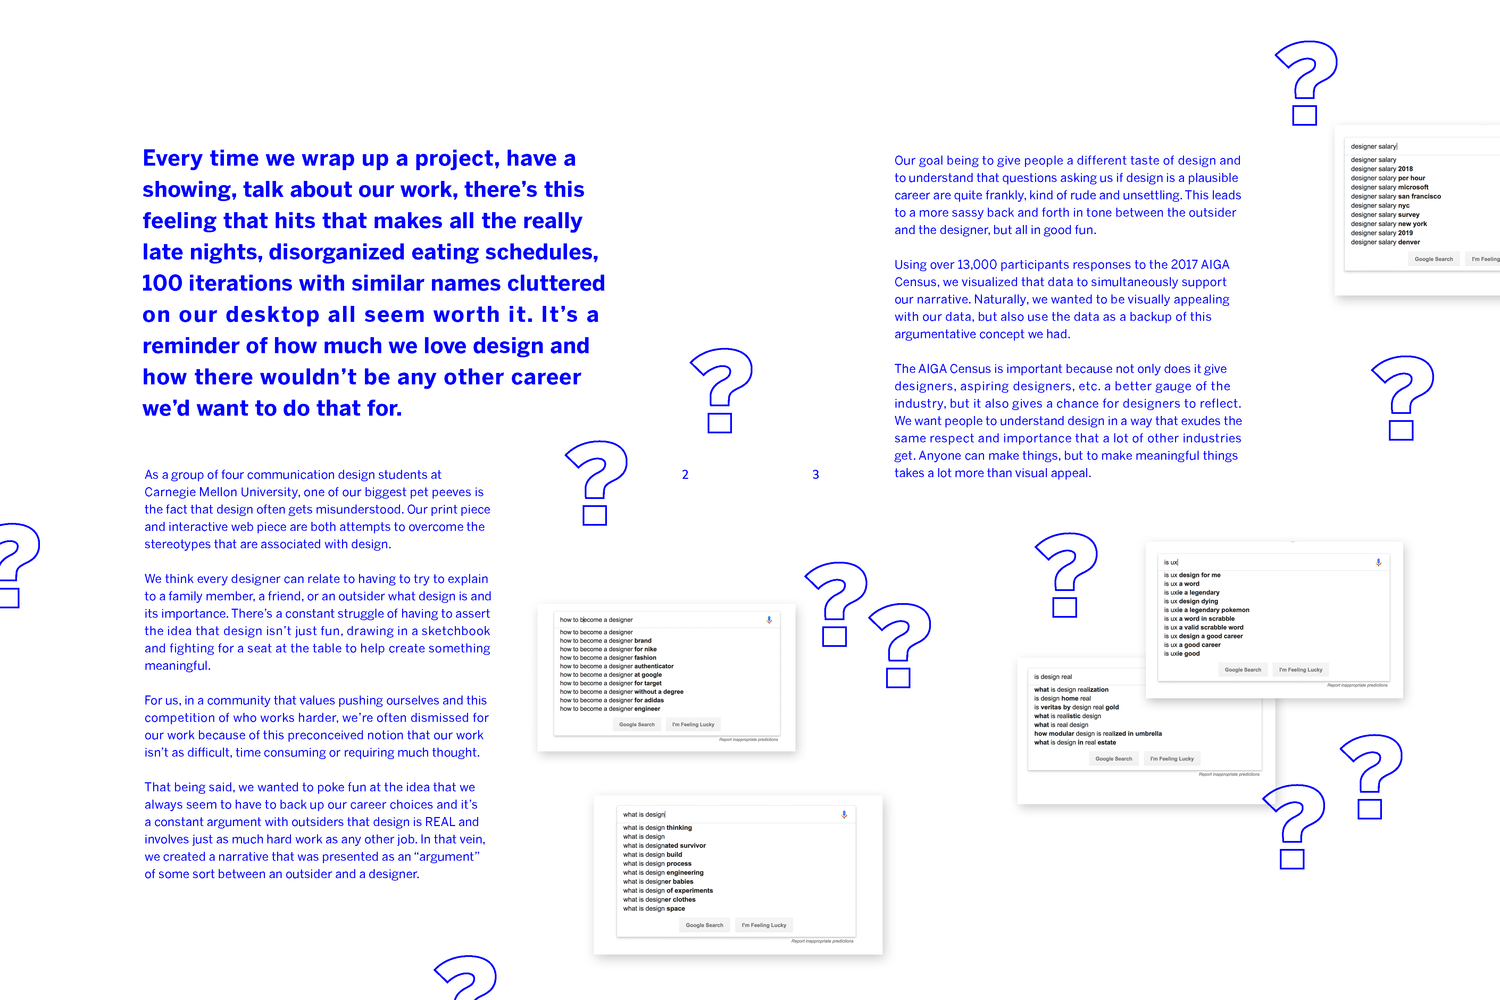 project1-aiga-spreads2.png